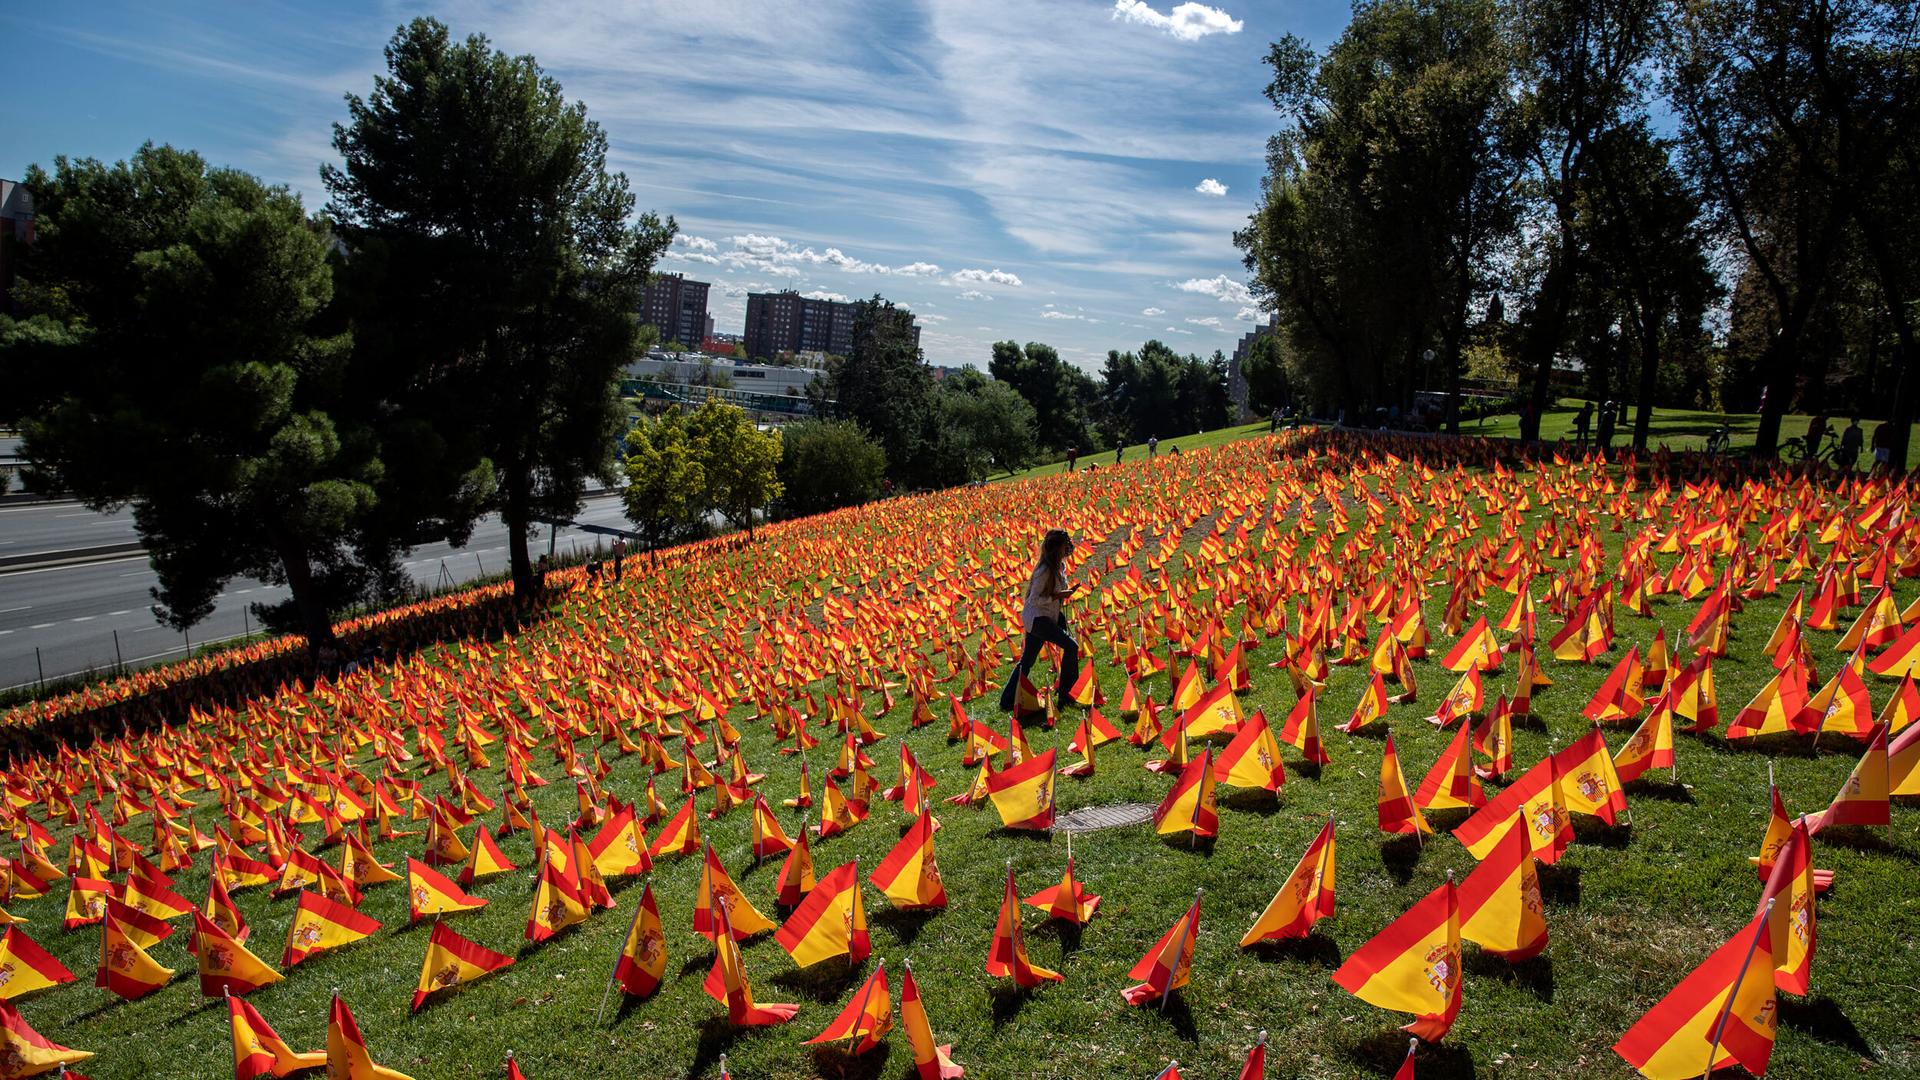 A woman walks among the Spanish flags placed in memory of coronavirus victims in Madrid, Spain, Sept. 27, 2020.